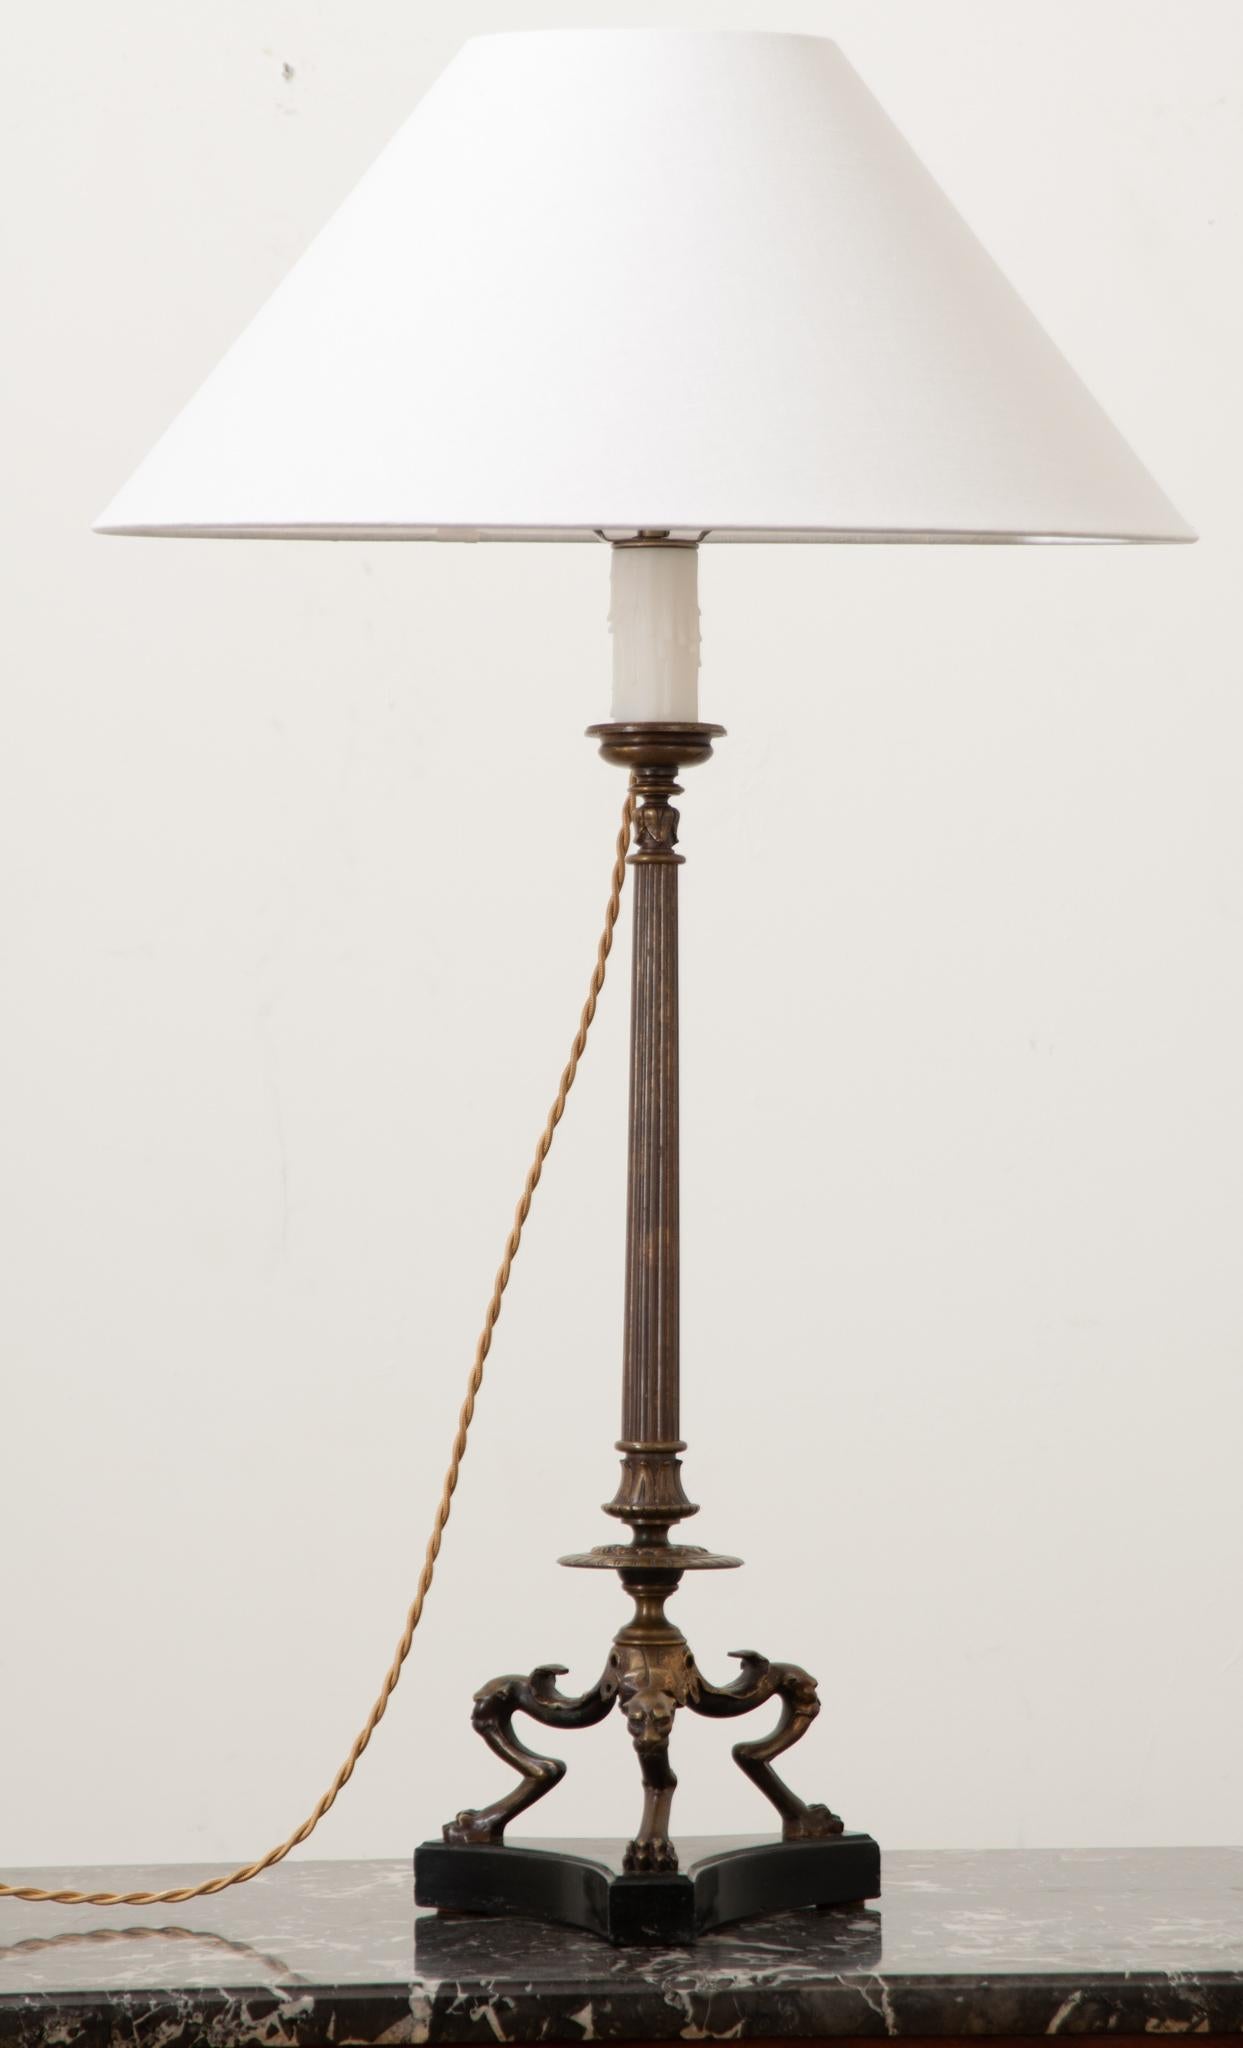 This tall Louis XVI style bronze candelabra is now an elegant table lamp. A slender fluted center column is lifted on three hind legs with paw feet over a shaped base of black marble. The lamp has recently been cleaned and wired for US electrical